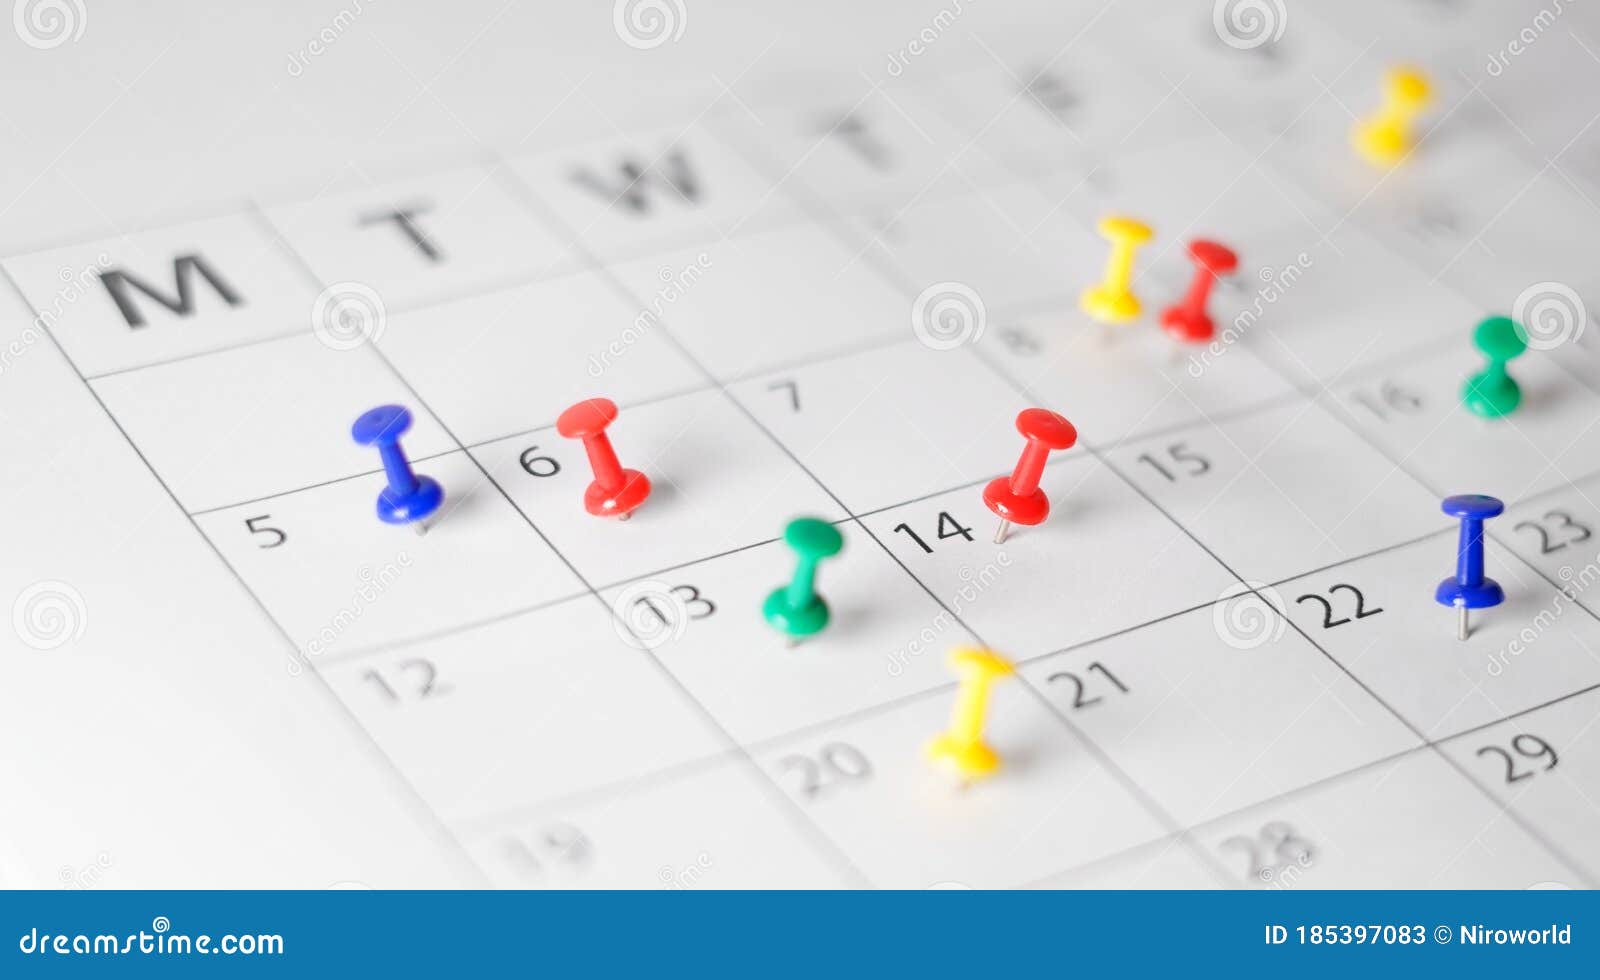 calendar page business events busy scheduling